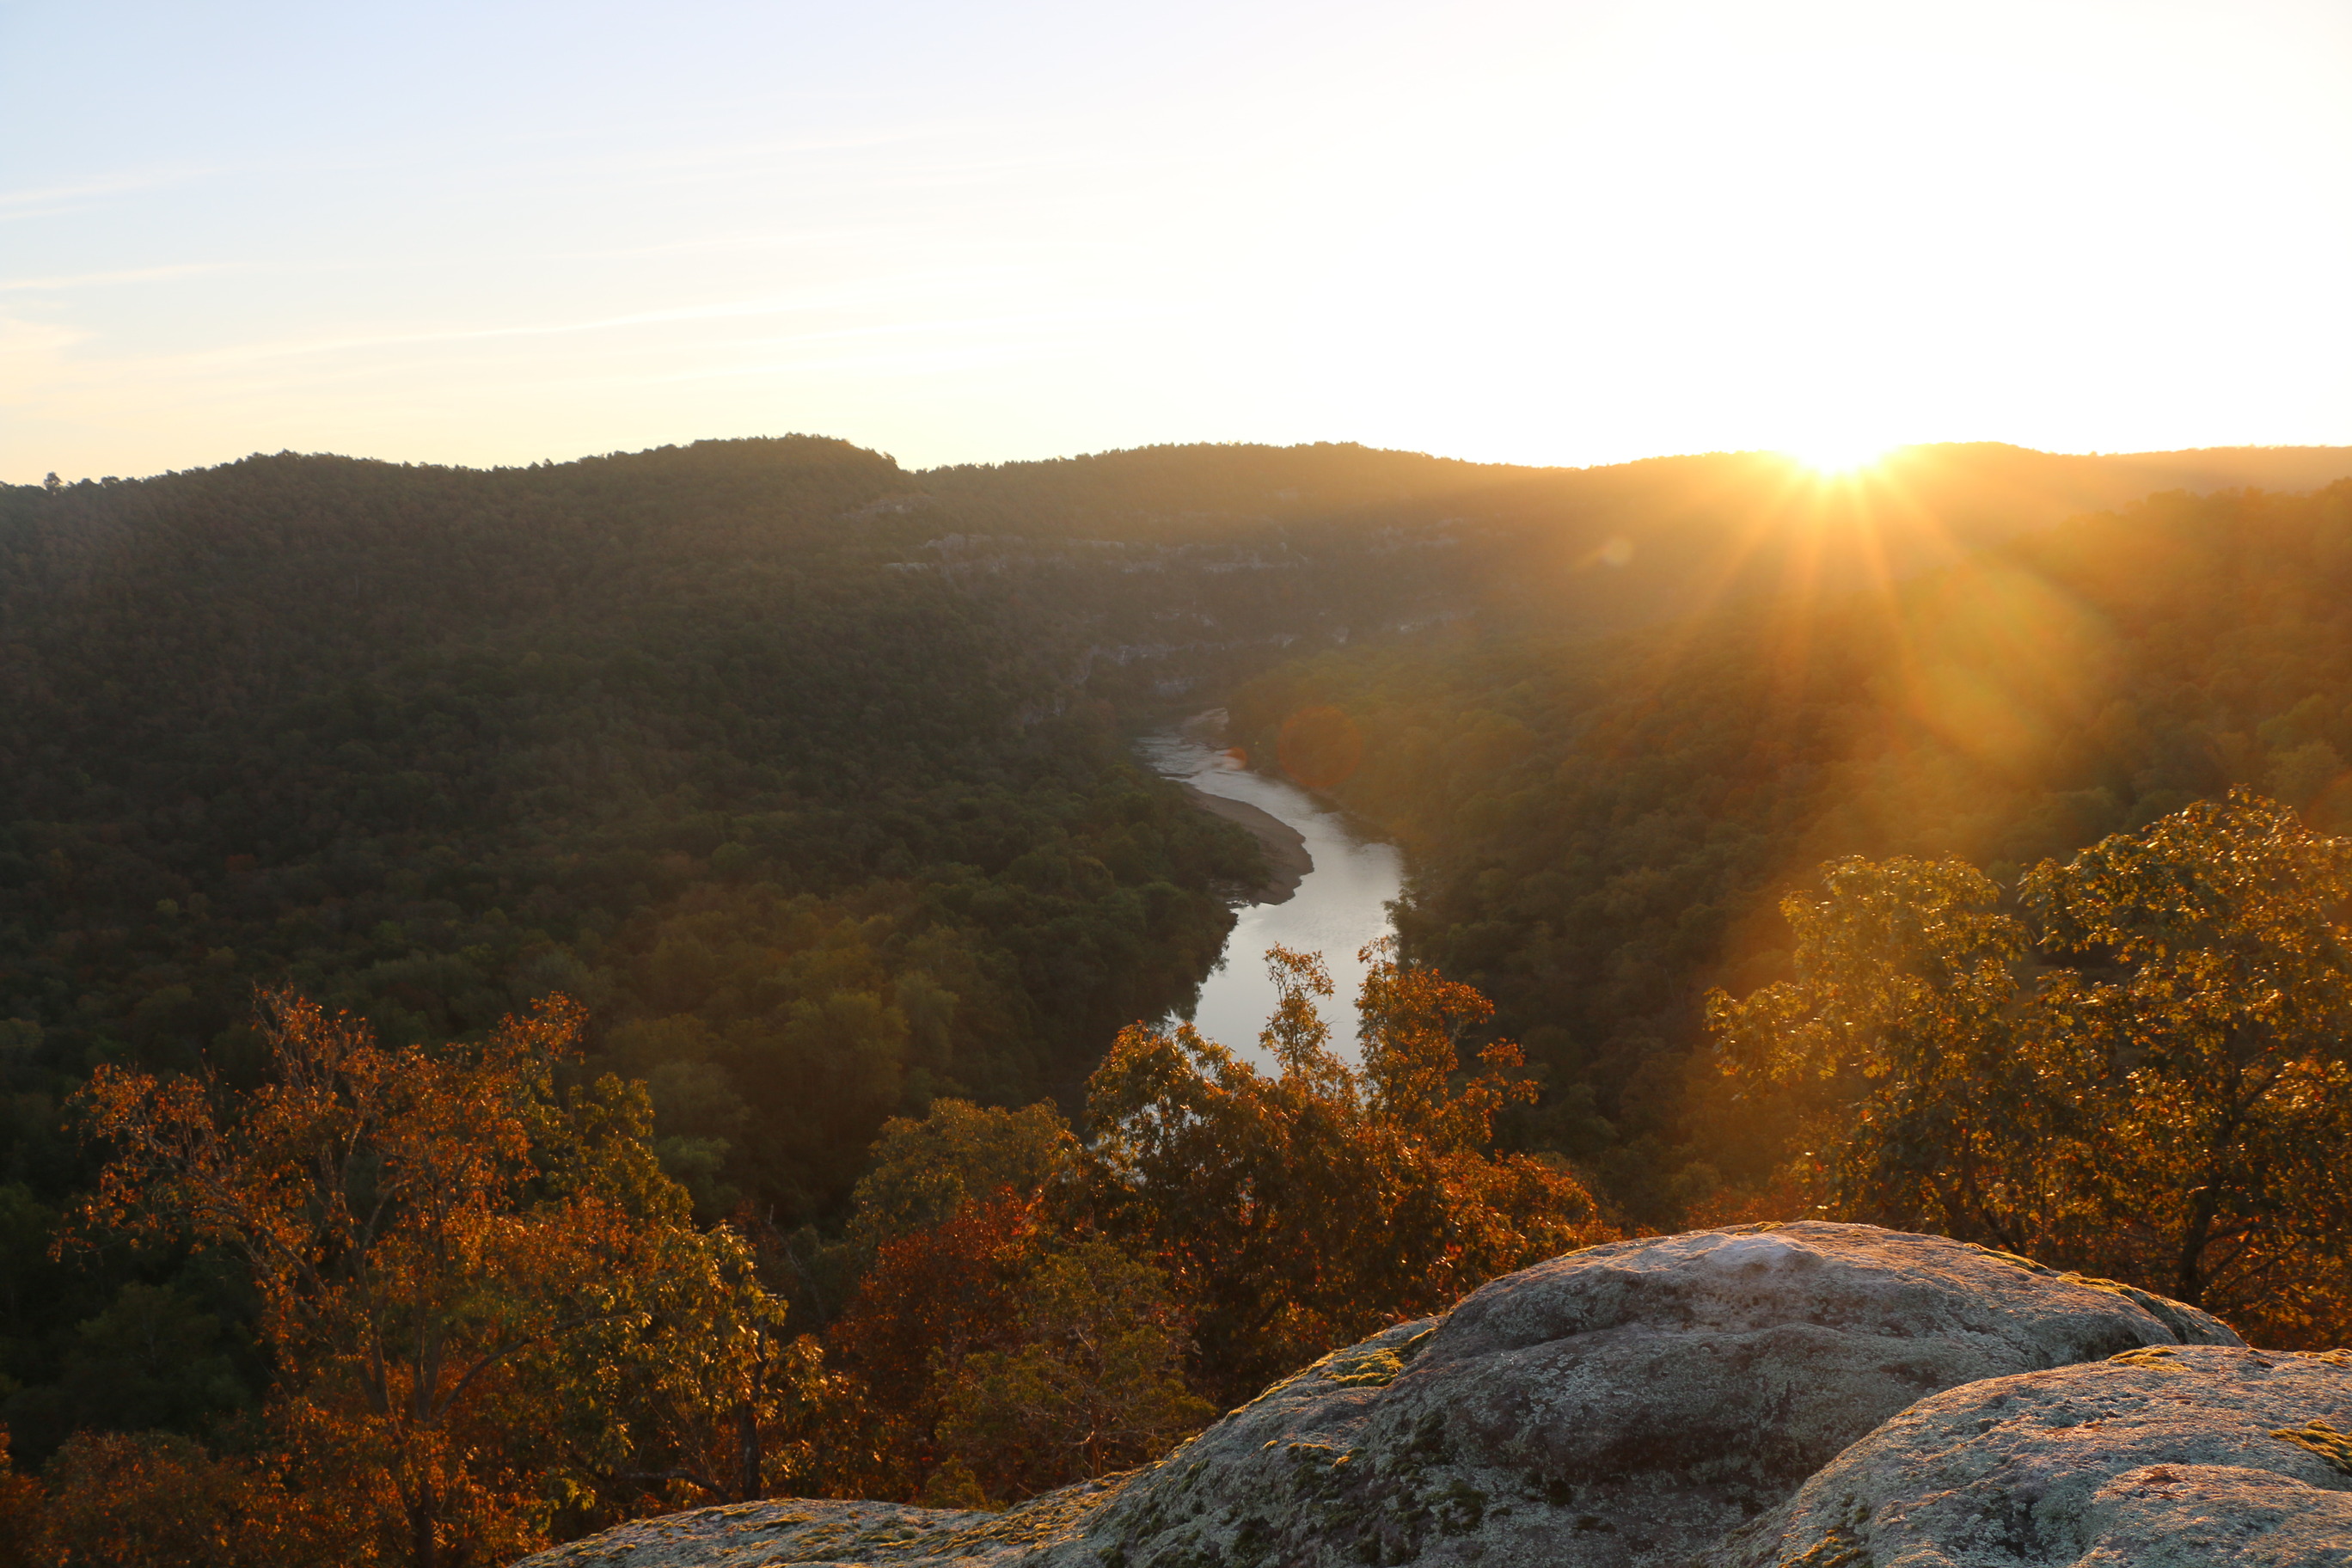 The sun rises over the Lower Buffalo Wilderness, revealing red, orange, and golden leaves